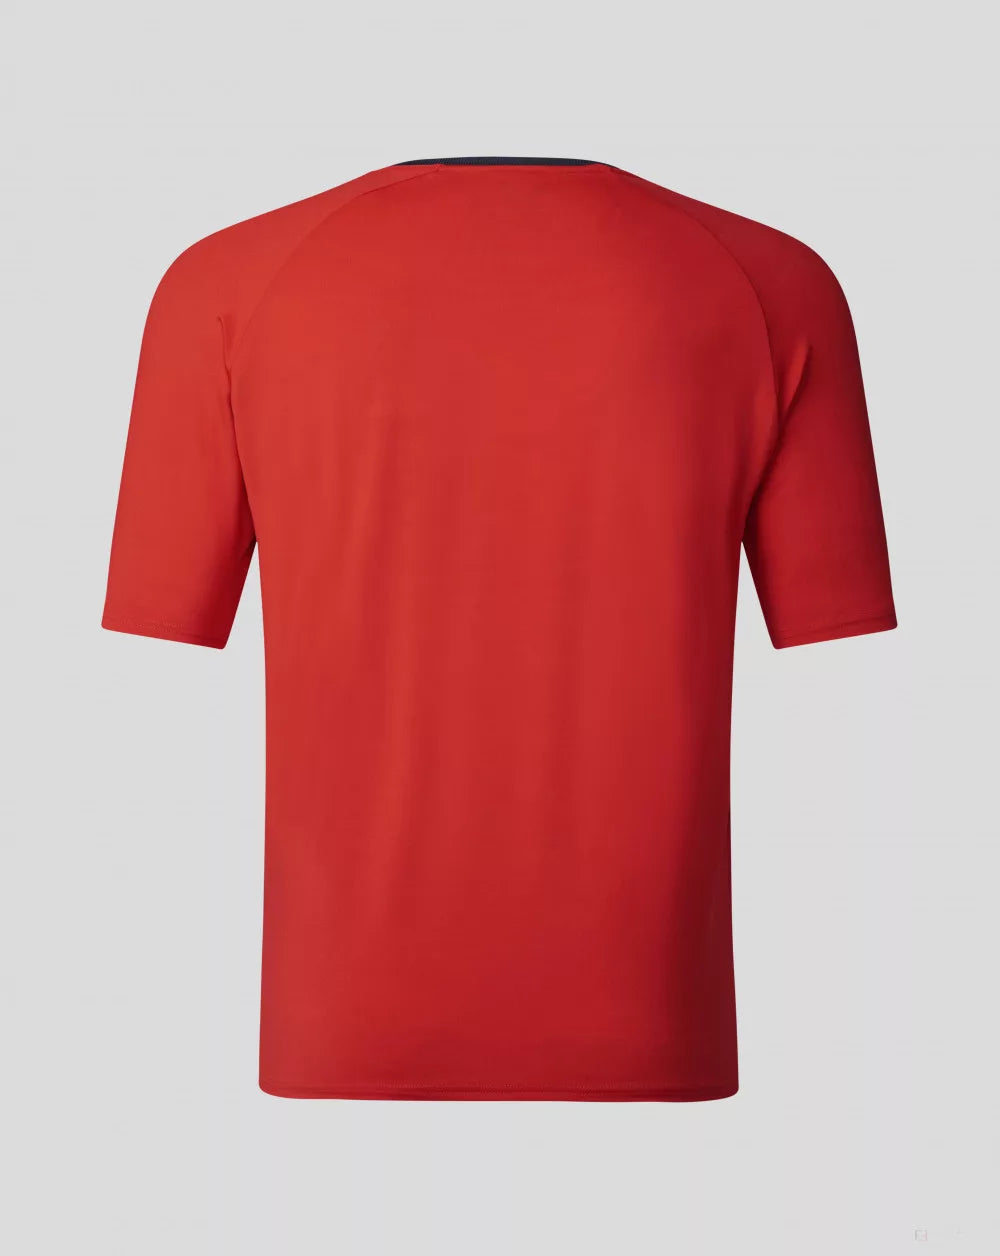 Red Bull 2023 Lifestyle T-shirt Red